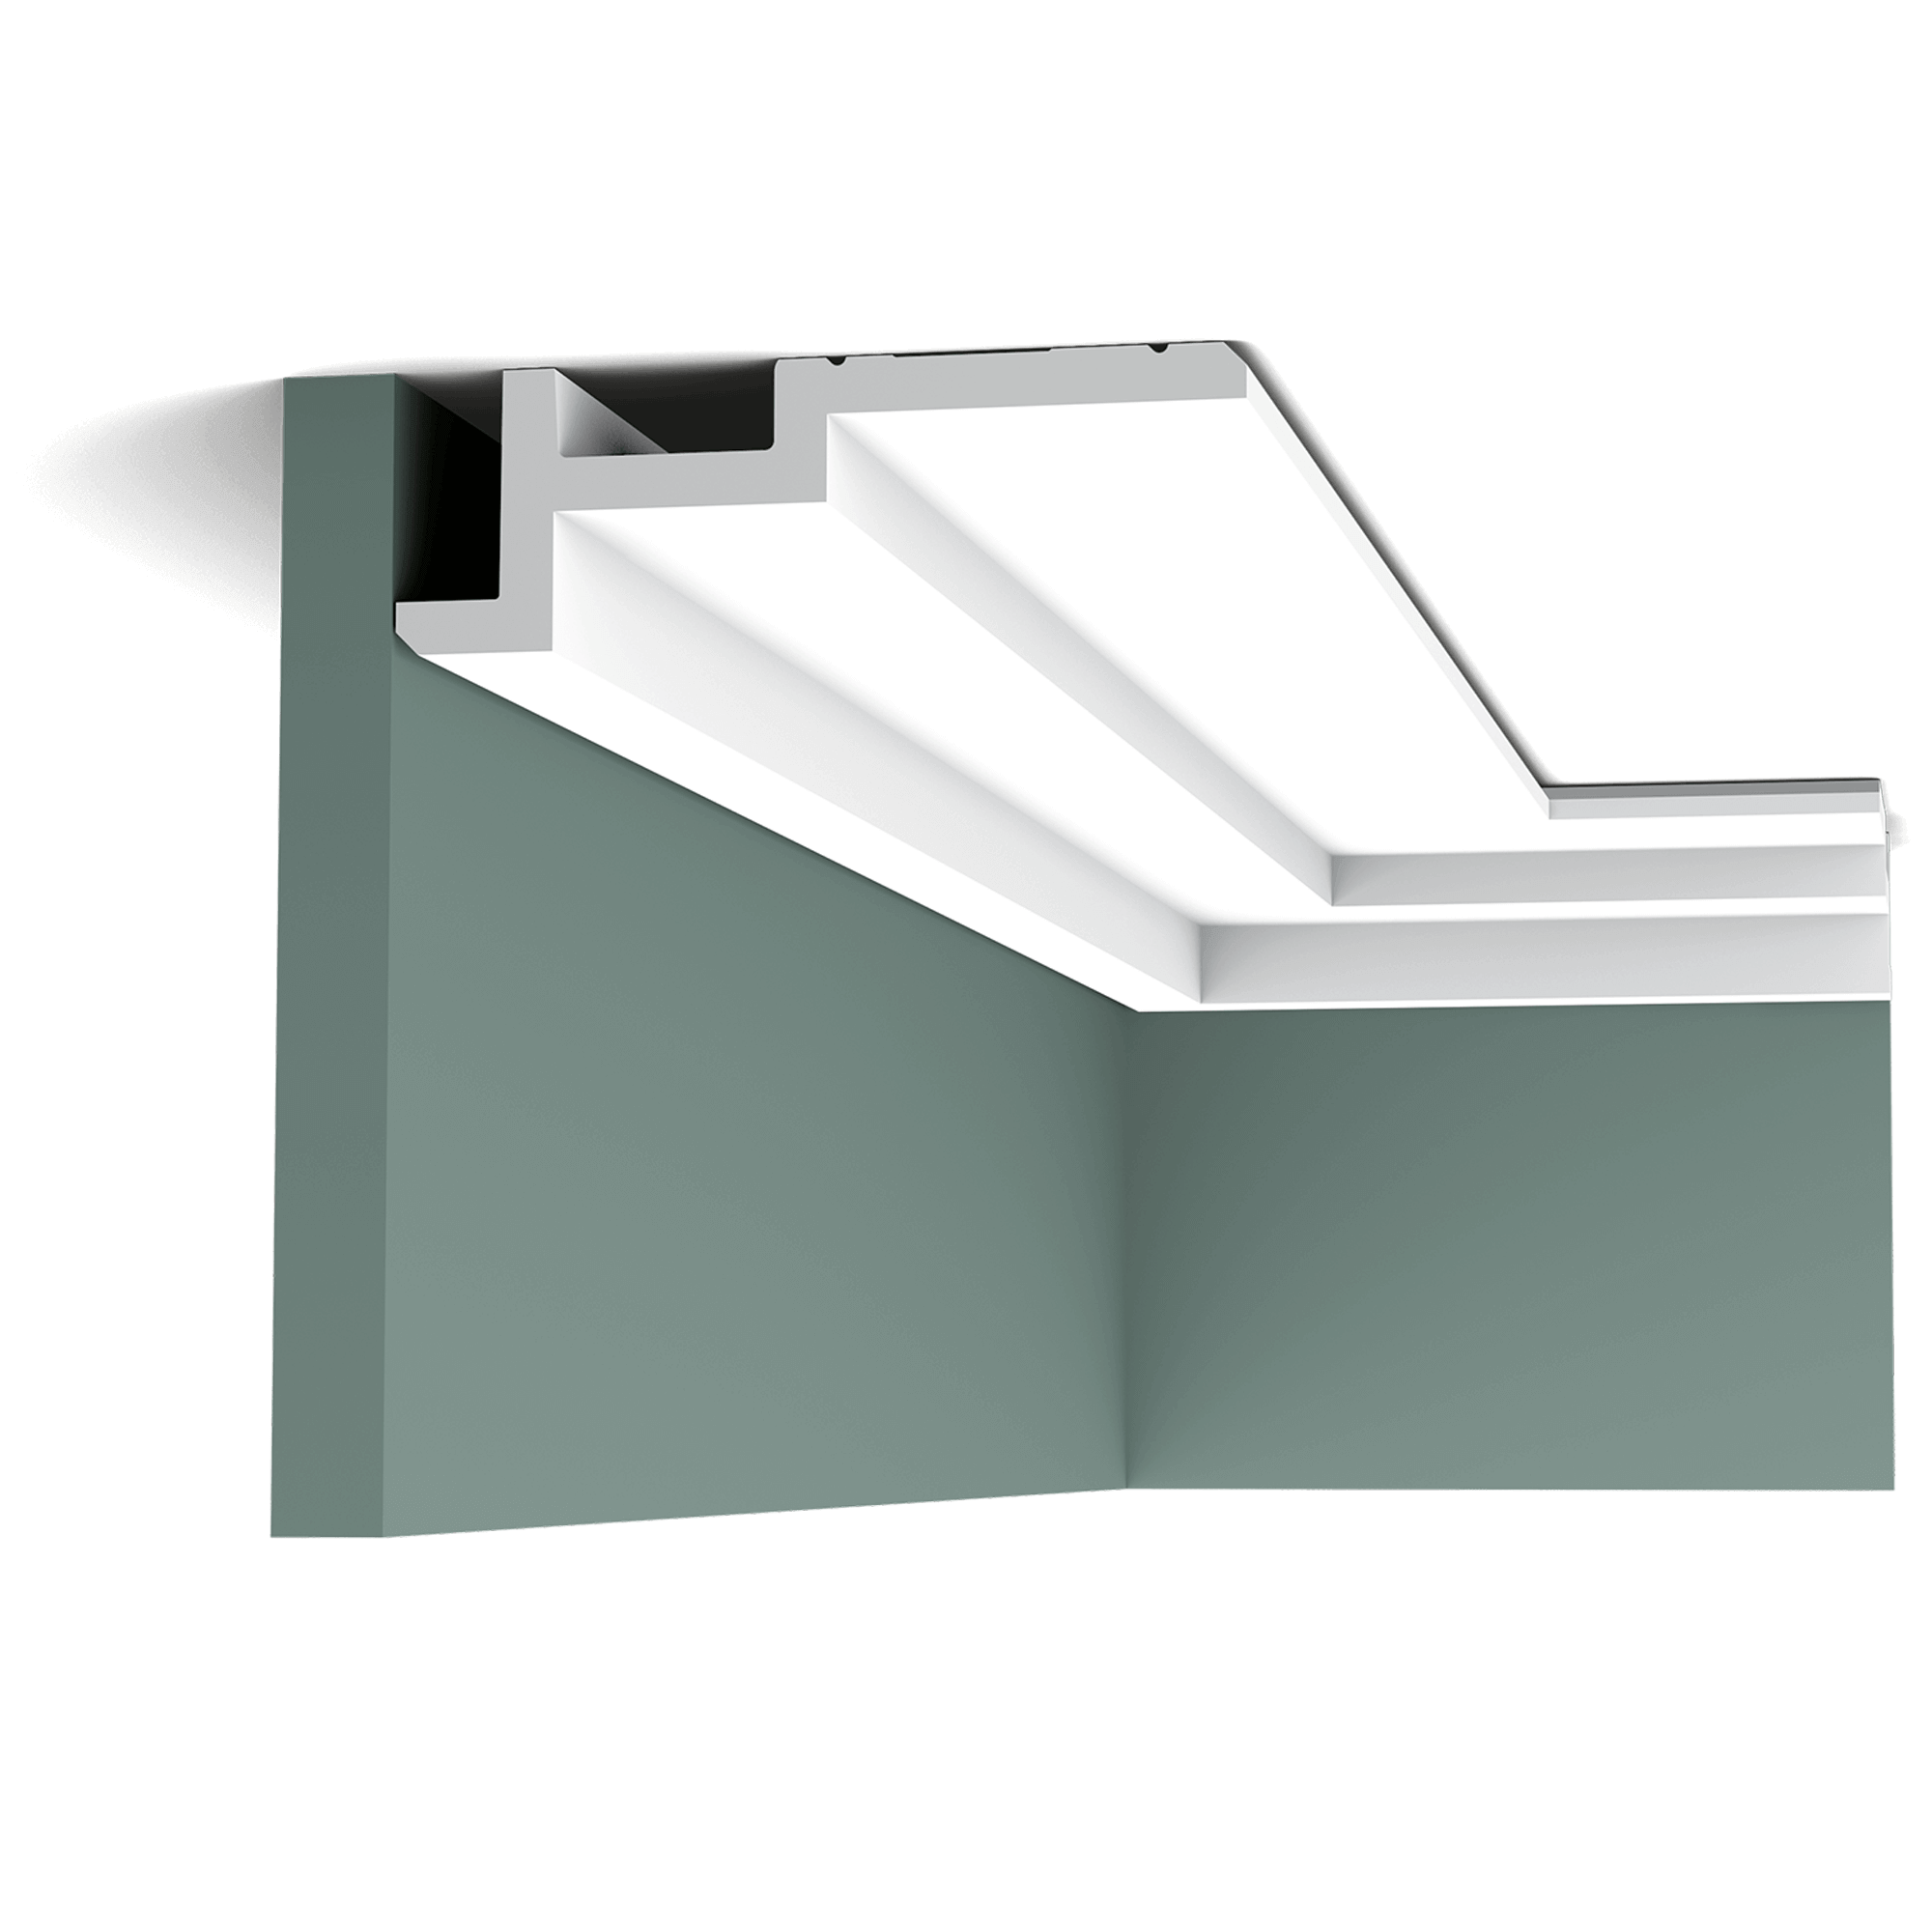 c396 cornice moulding 9bd6 A clean, modern profile from the Steps range. Here we fix the largest section to the ceiling, making the space seem wider. The angled corners above and below provide additional subtle shadow lines. Designed by Orio Tonini.